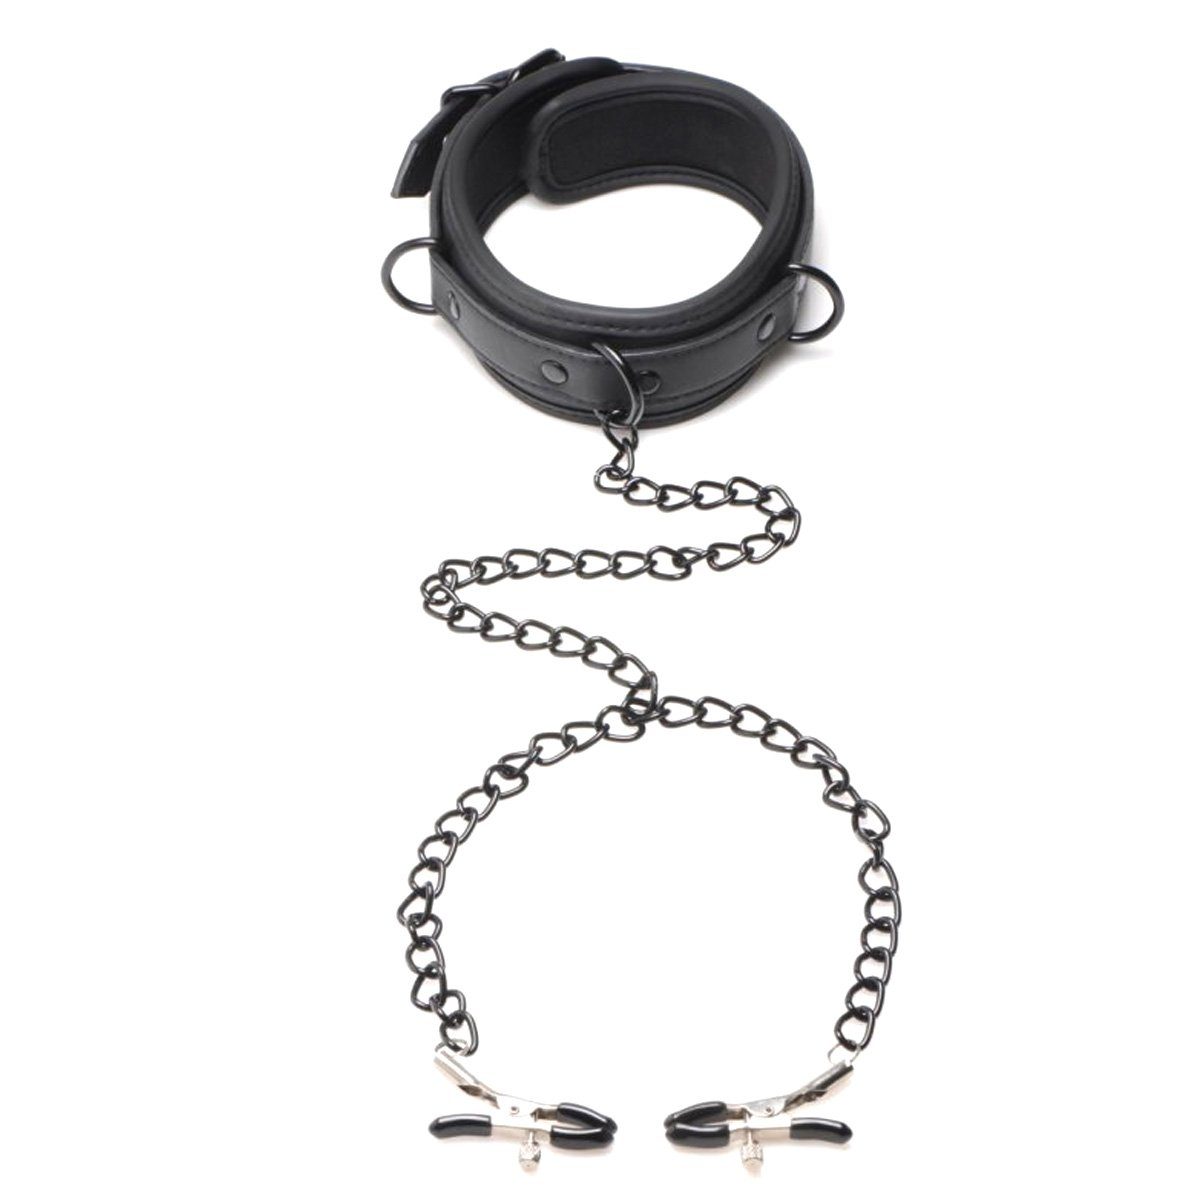 Master Series Bondage-Set Collared Temptress Collar with Nipple Clamps, gepolstert